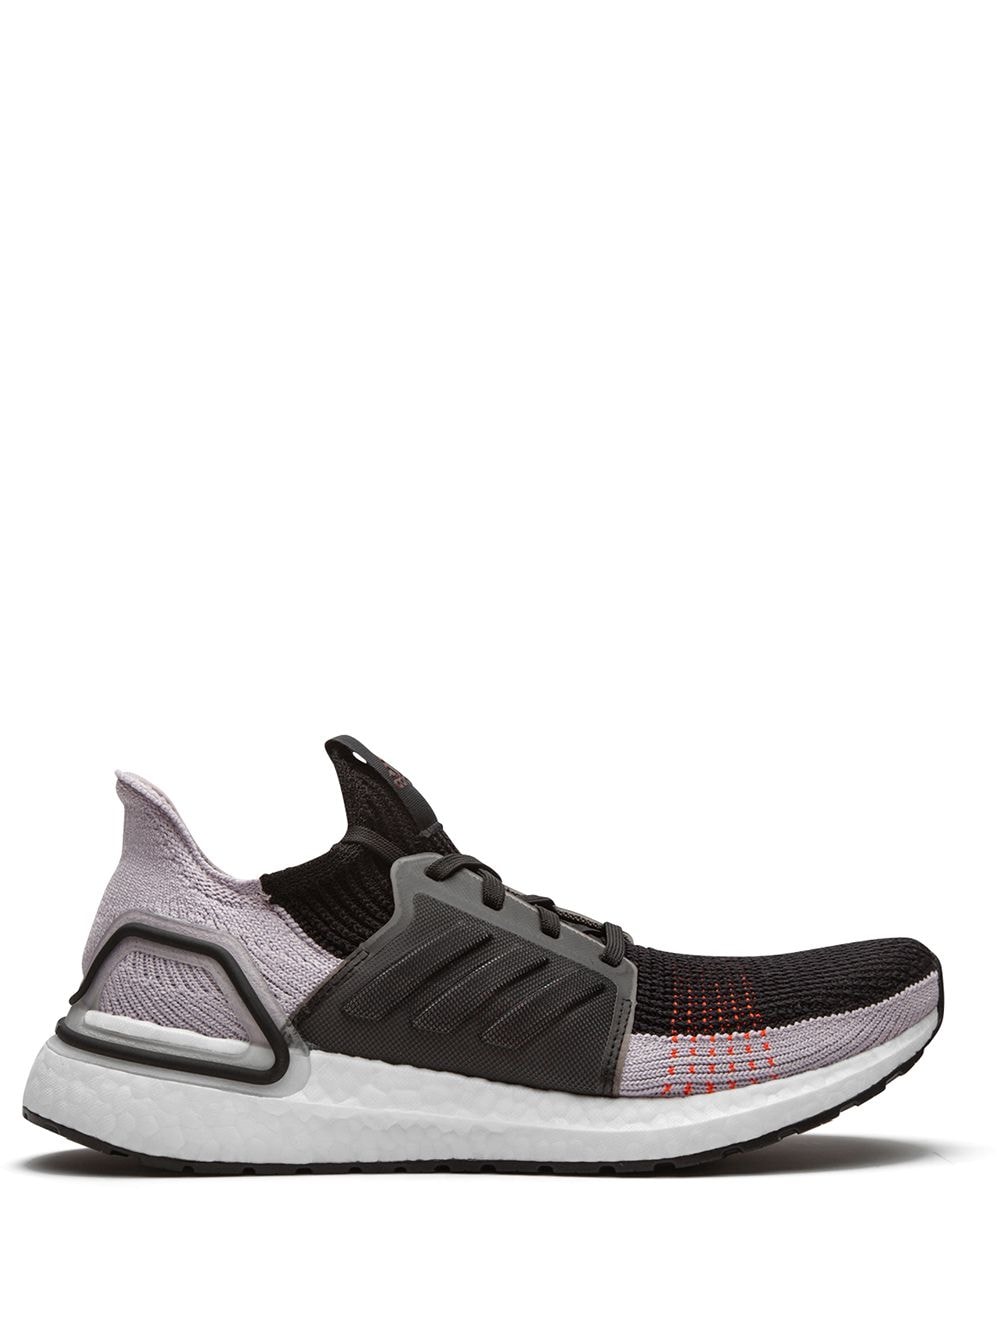 adidas Ultraboost 19 "Core Black/Soft Vision/Solar Red" sneakers - Grey von adidas